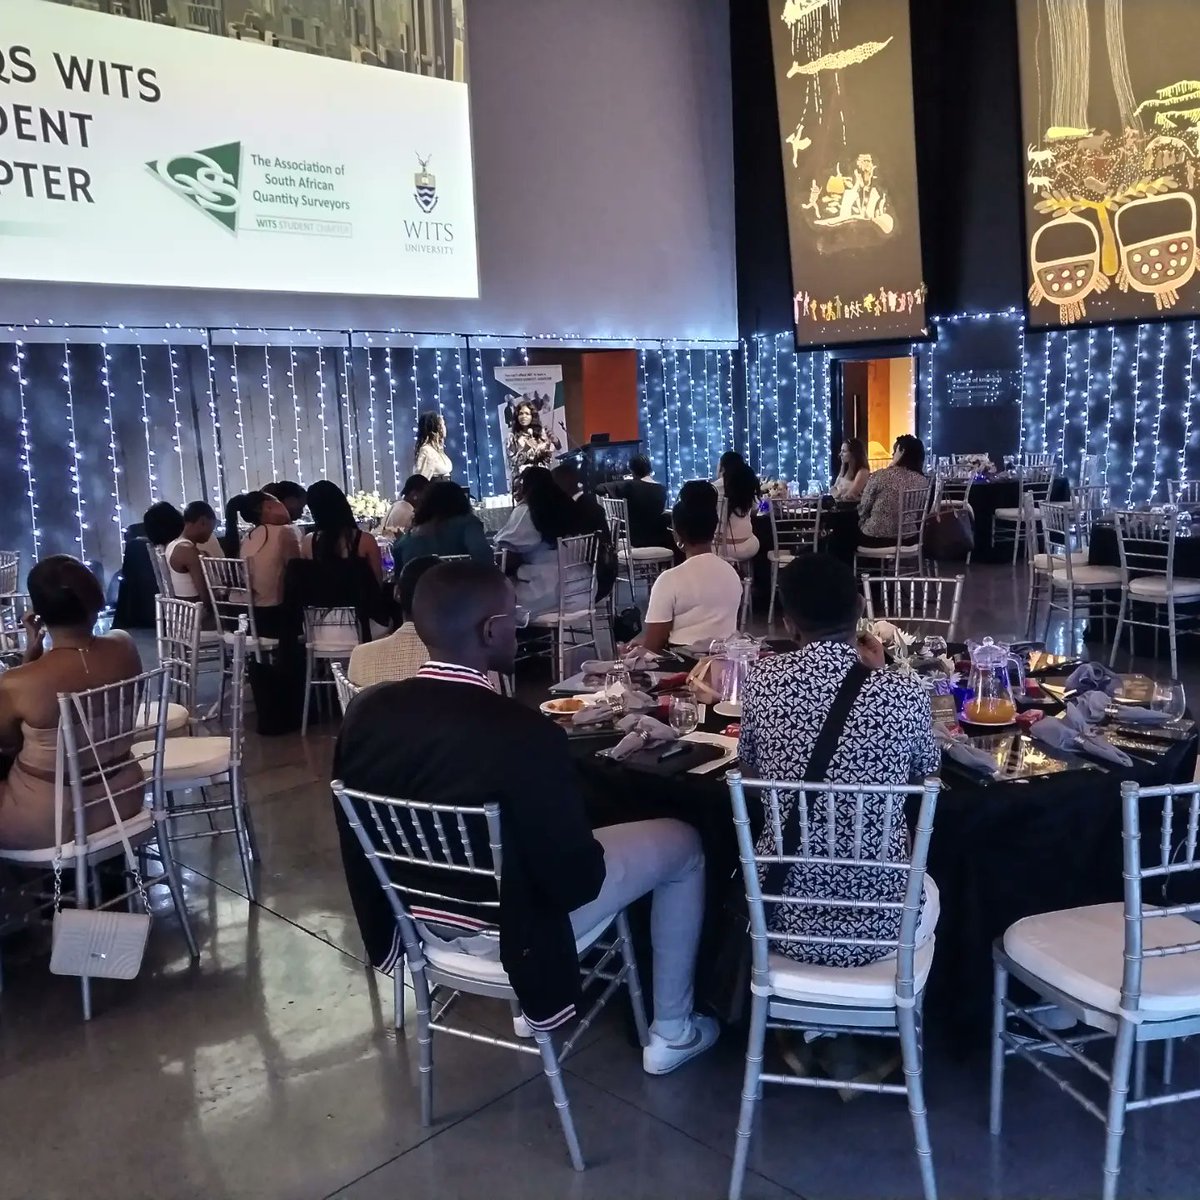 Thank you @ASAQS_WitsSC for choosing @OriginsCentre as your preferred venue for your Women's Spring Breakfast. We aimed to ensure it is a beautiful experience 😊 For a memorable function or event at Origins Centre, please contact Bongiwe.Ndulula@wits.ac.za